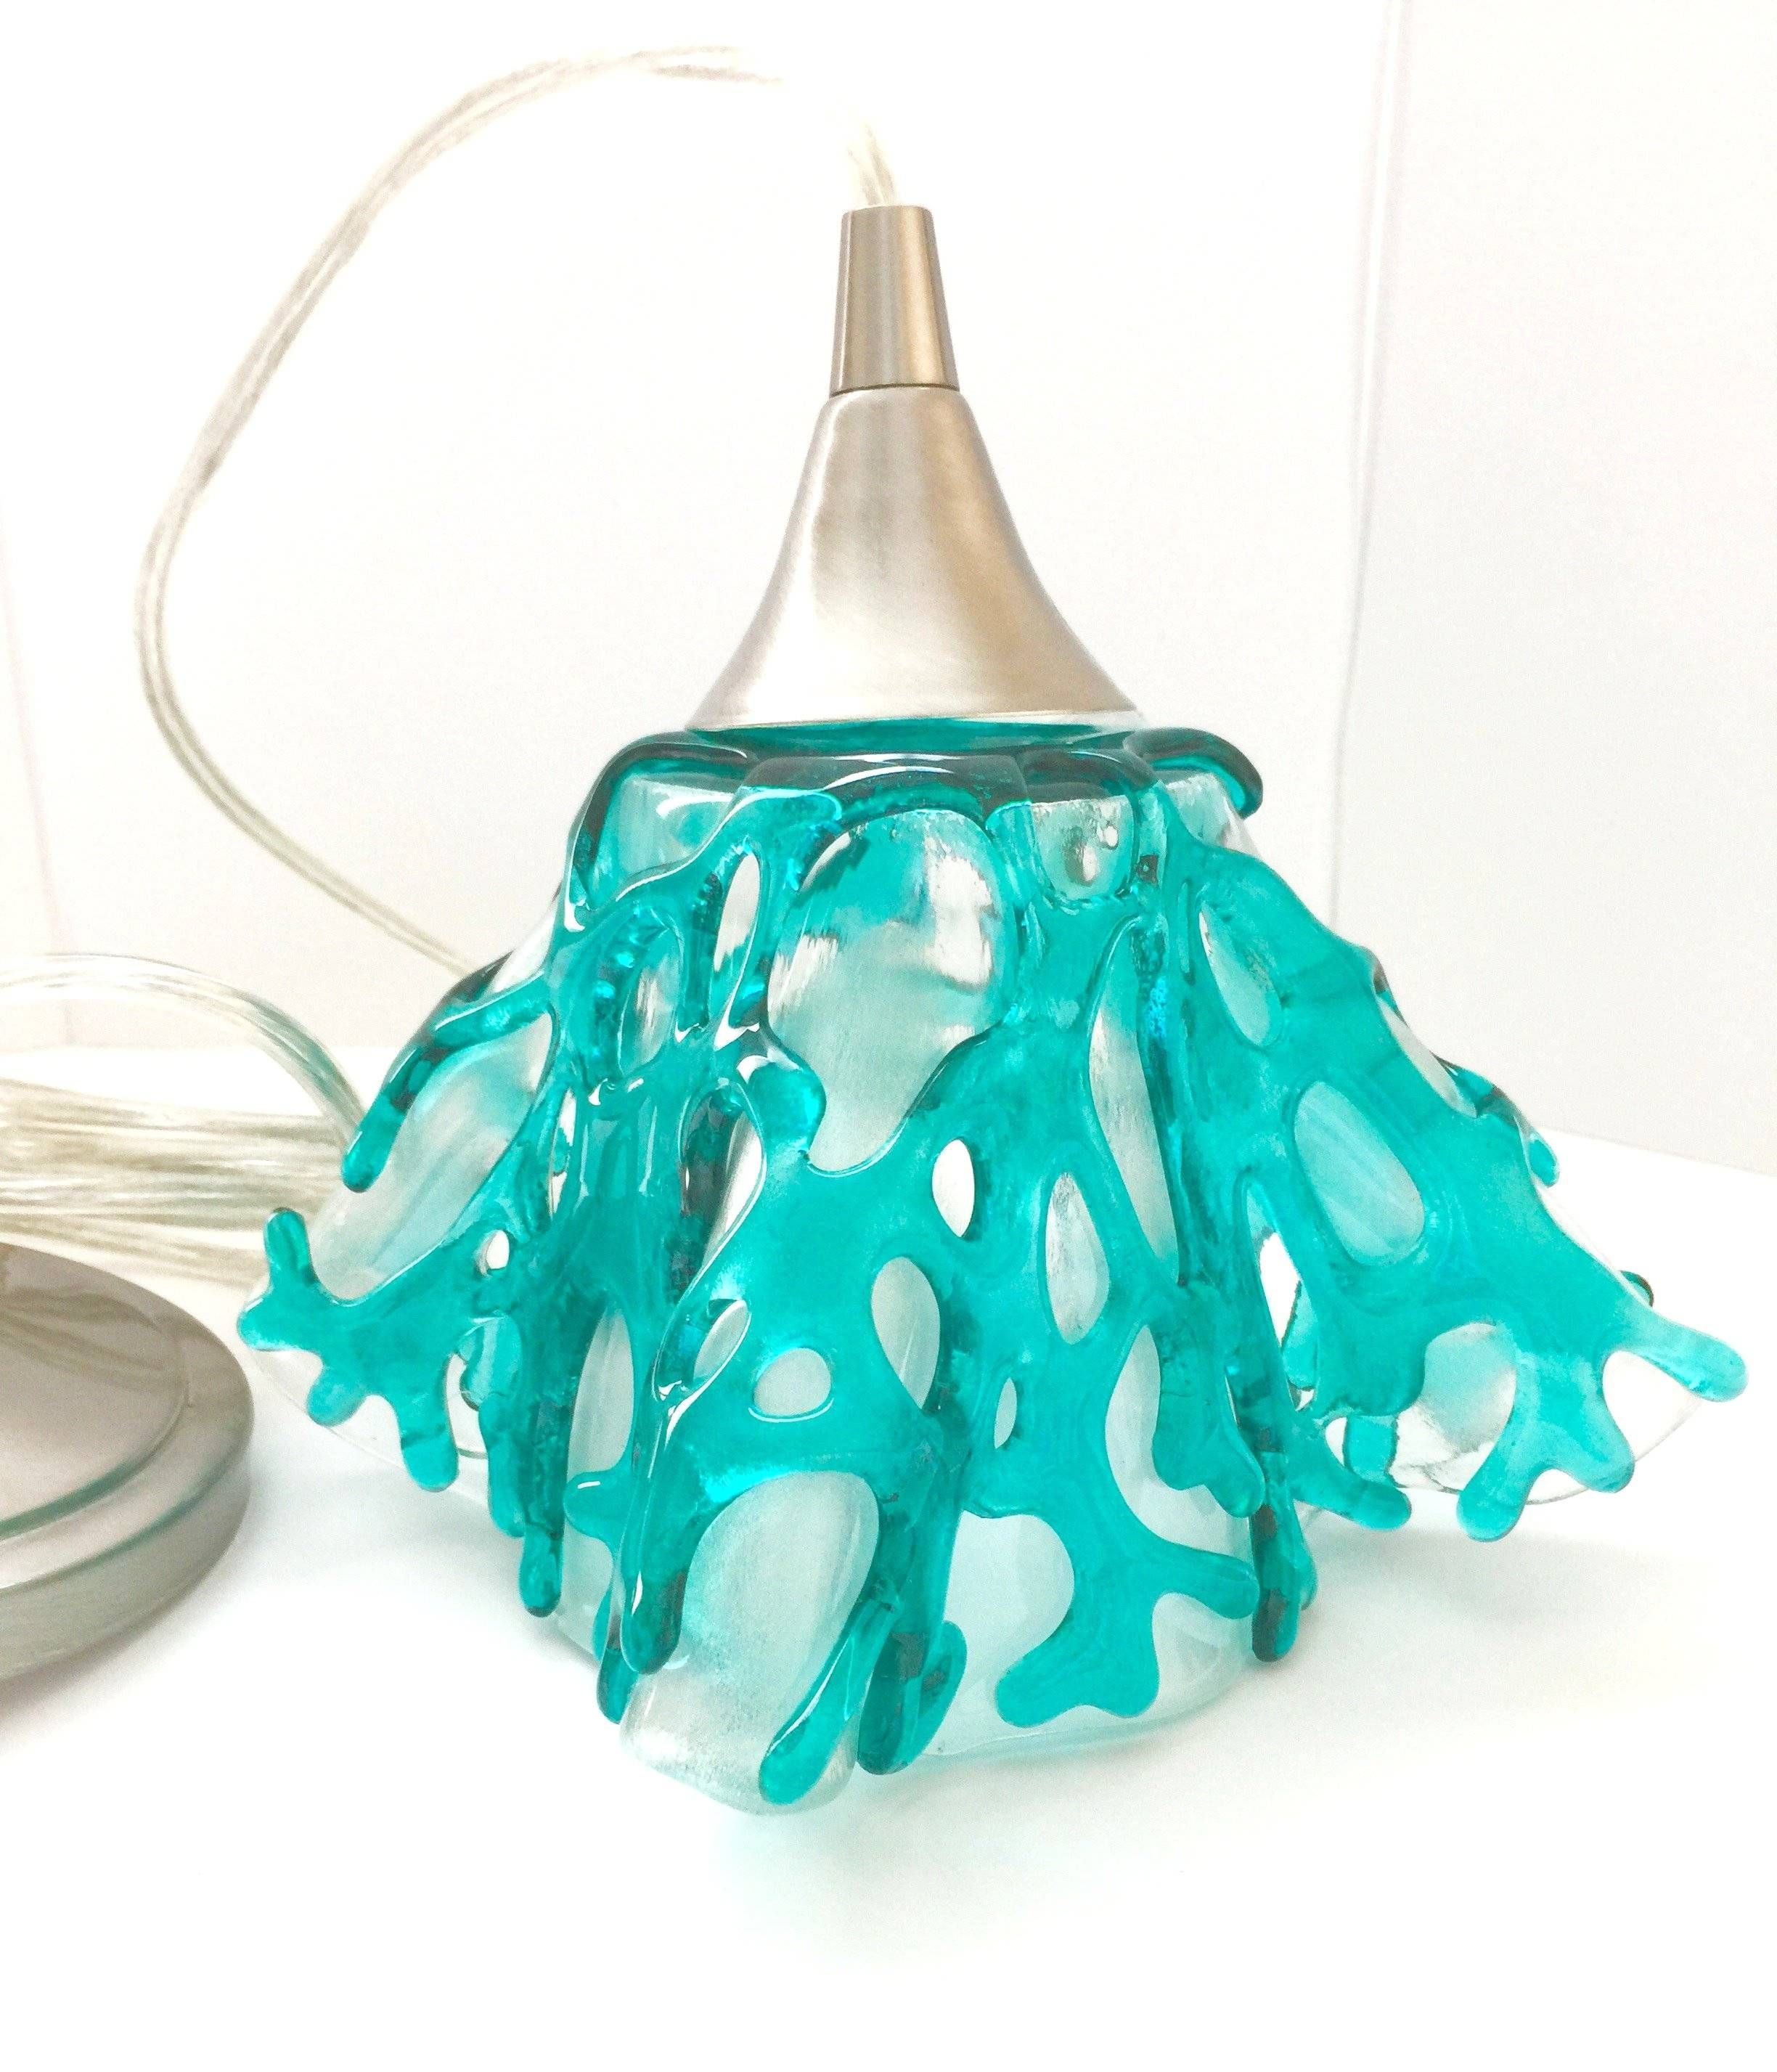 Coastal Coral Aqua Hanging Pendant Light For Kitchen Island Or Intended For Sea Glass Pendant Lights (View 11 of 15)